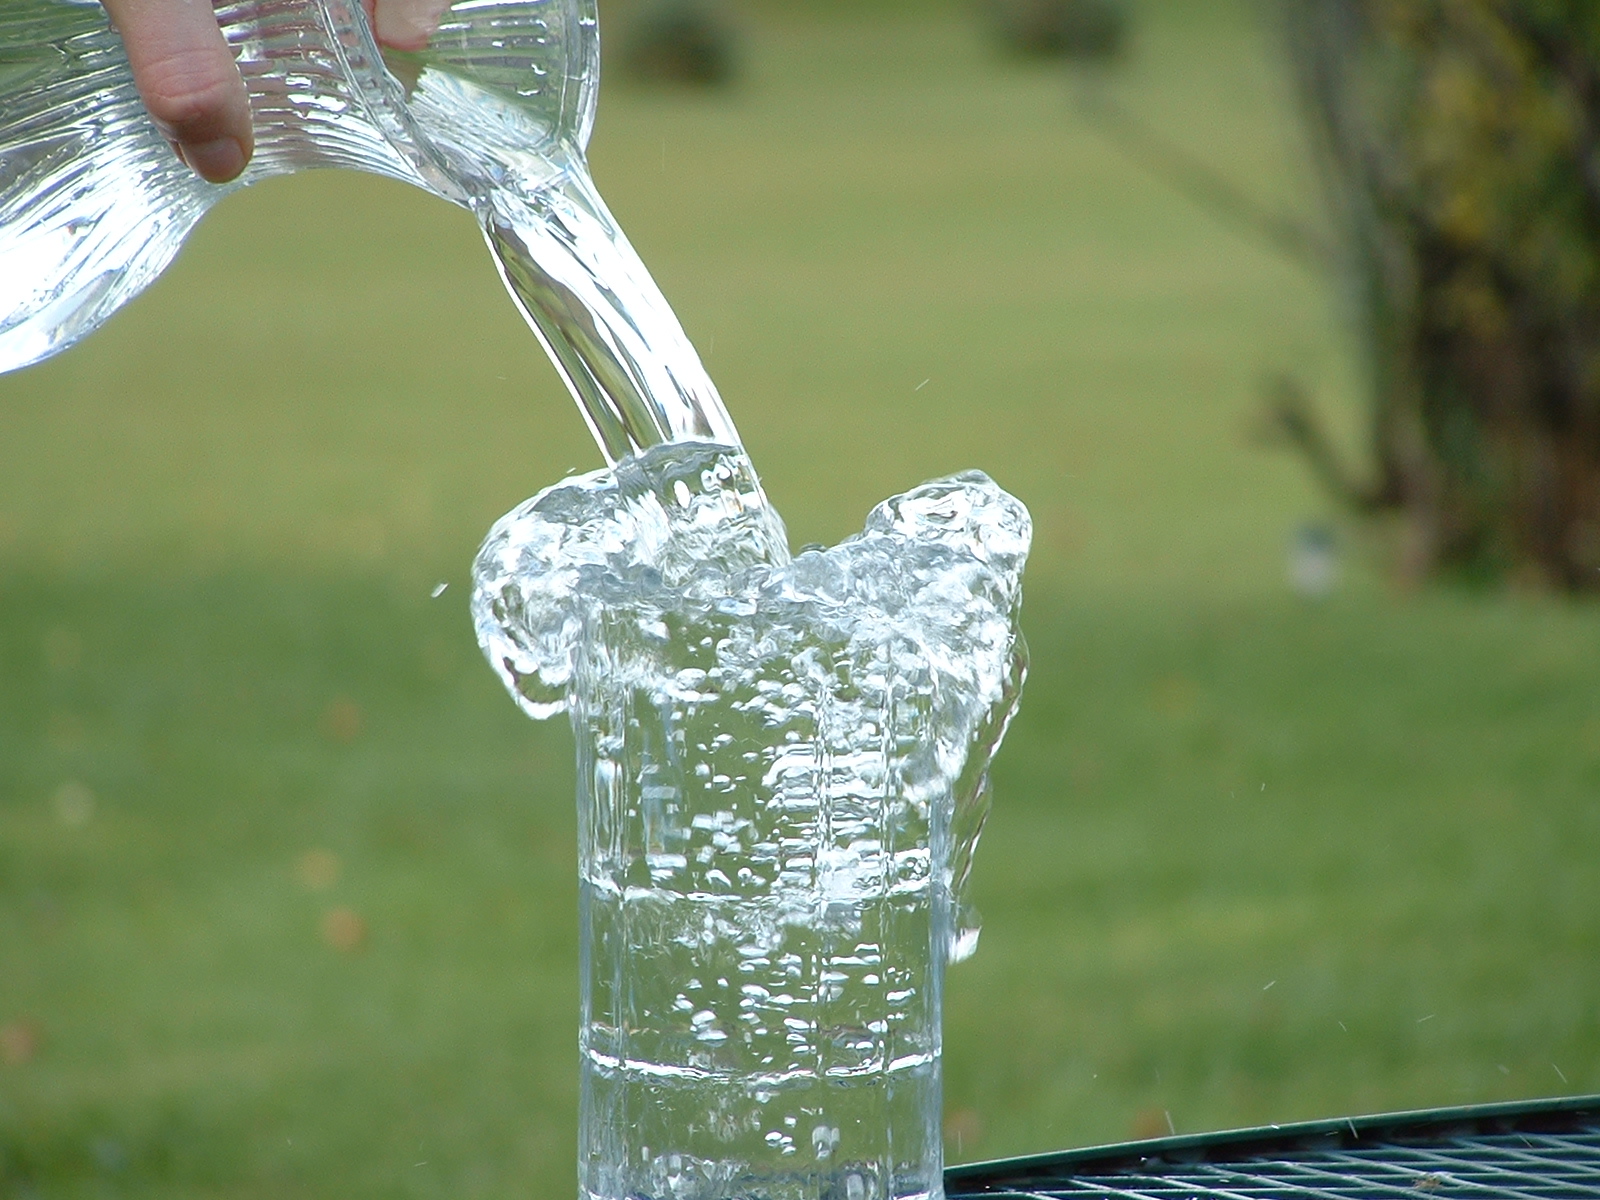 Overflowing glass of water.